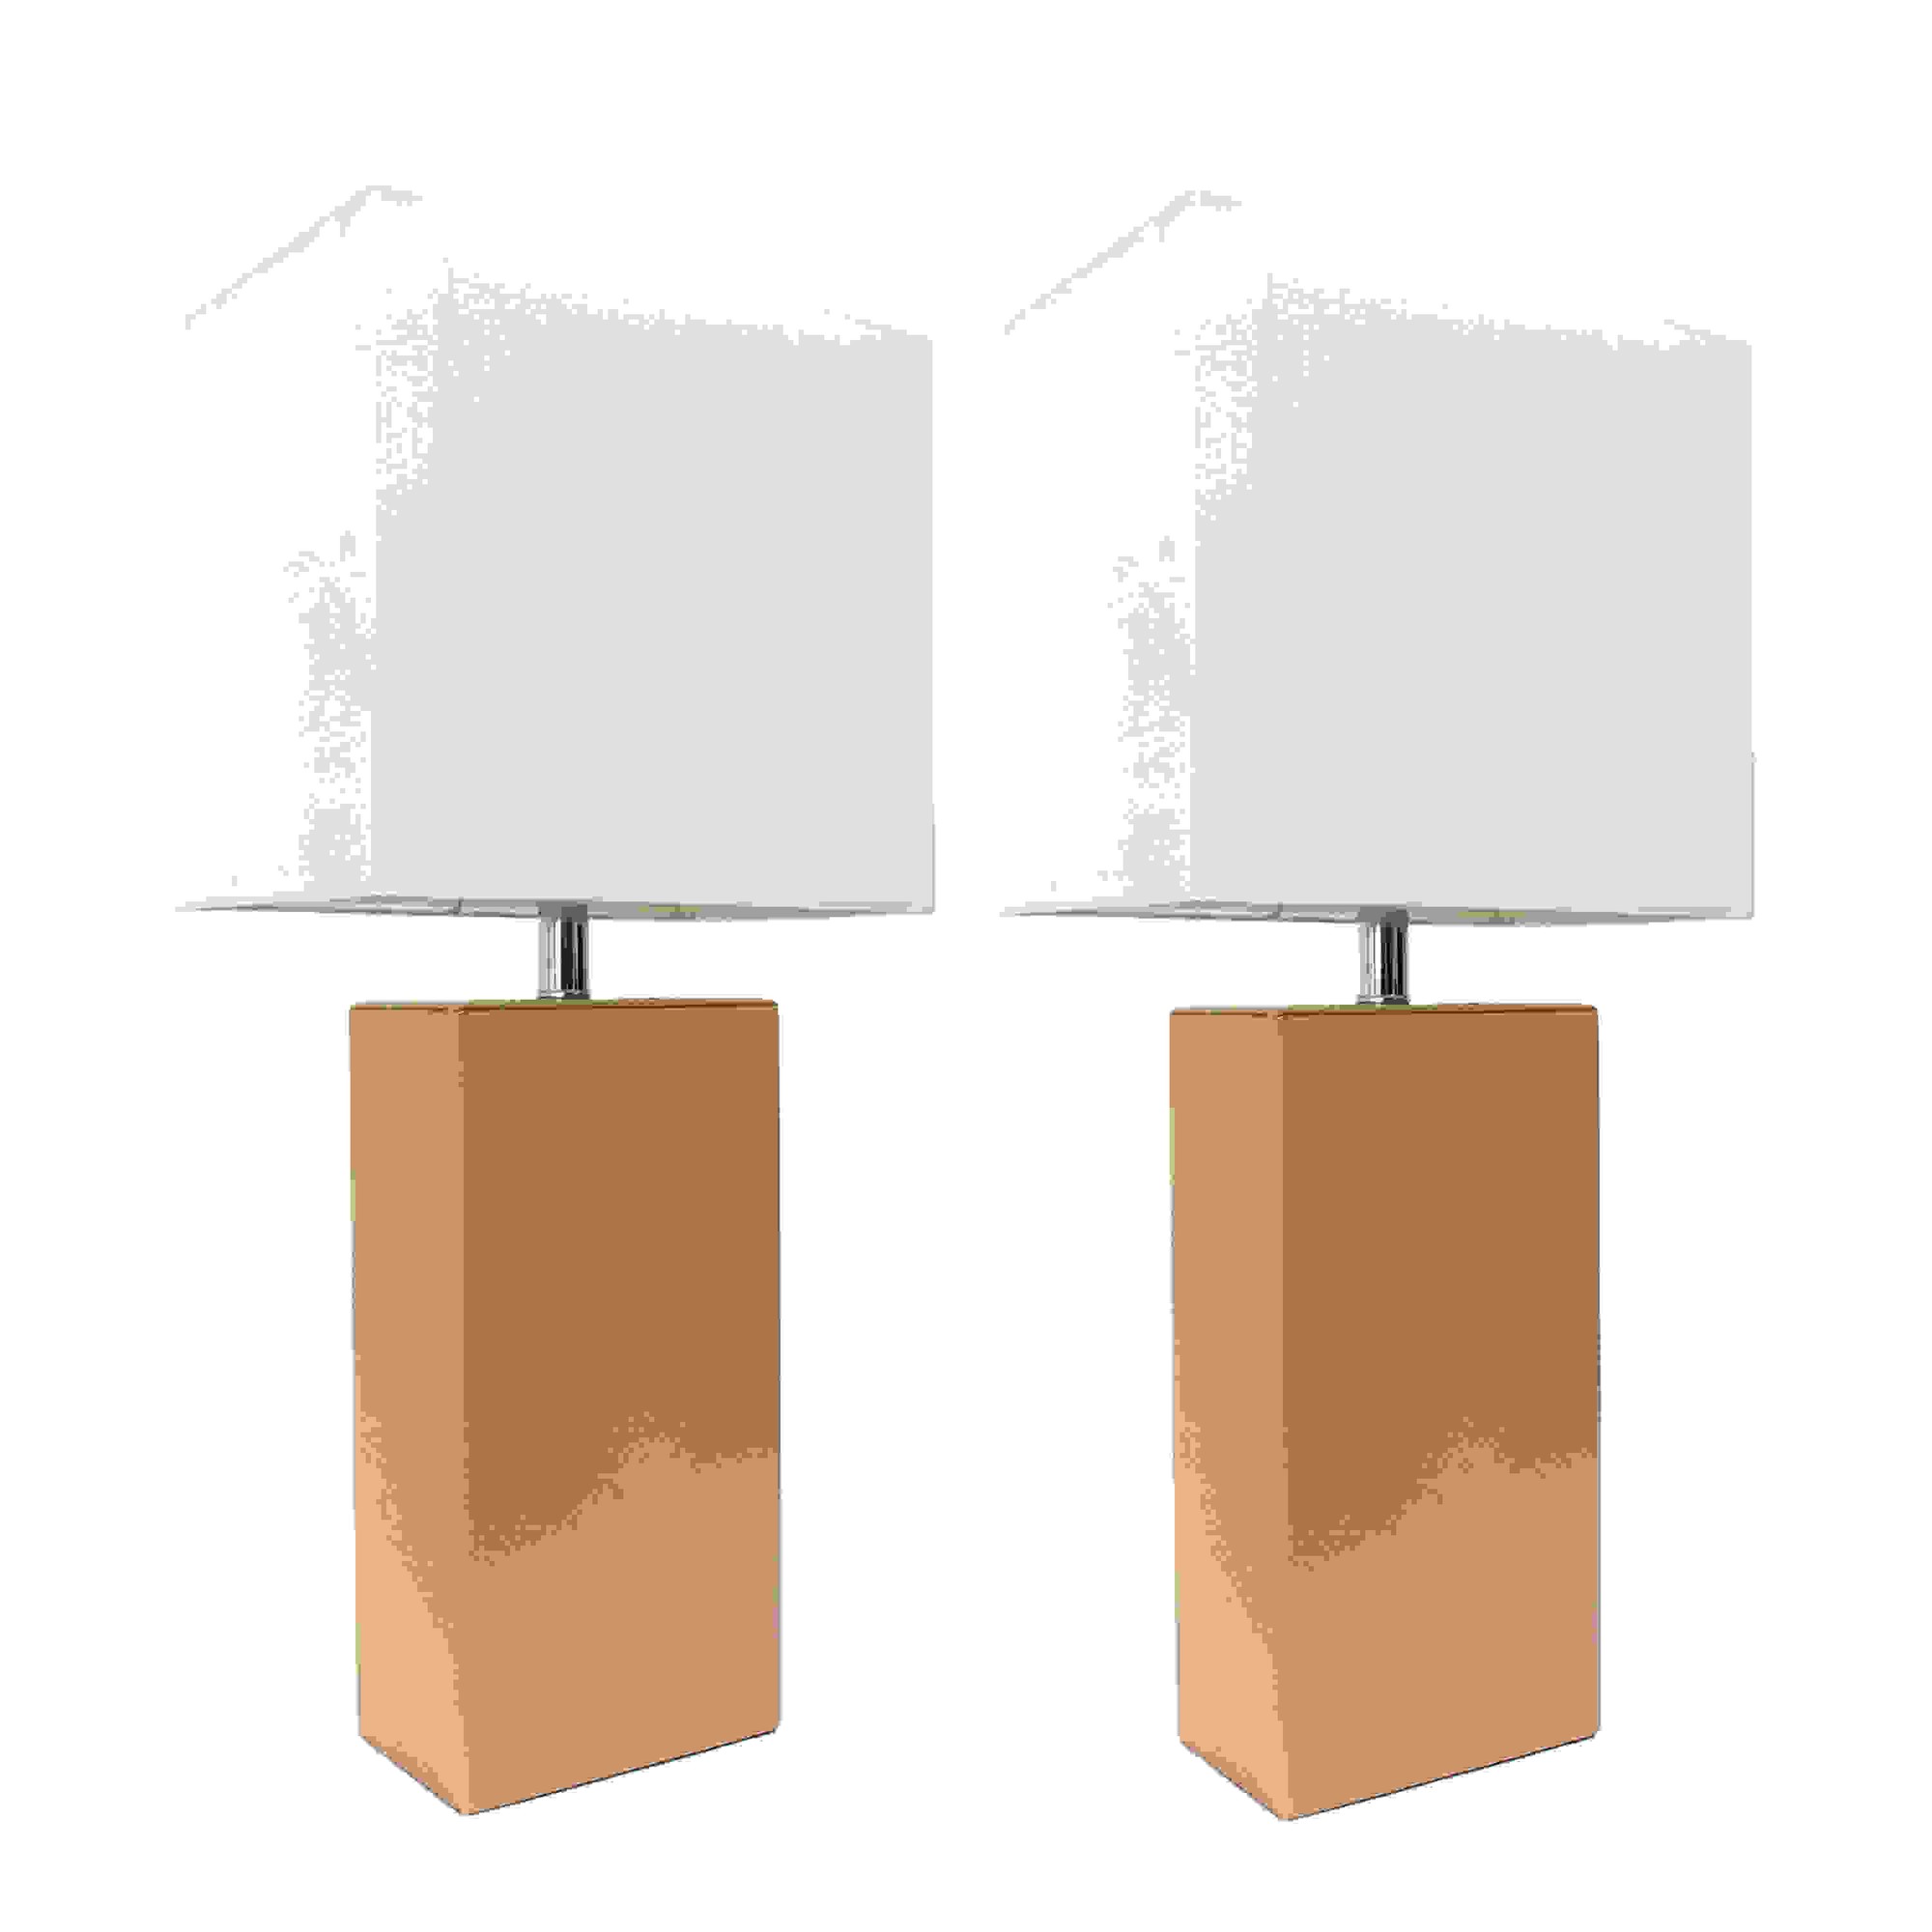 Elegant Designs 2 Pack Modern Leather Table Lamps with White Fabric Shades, Beige